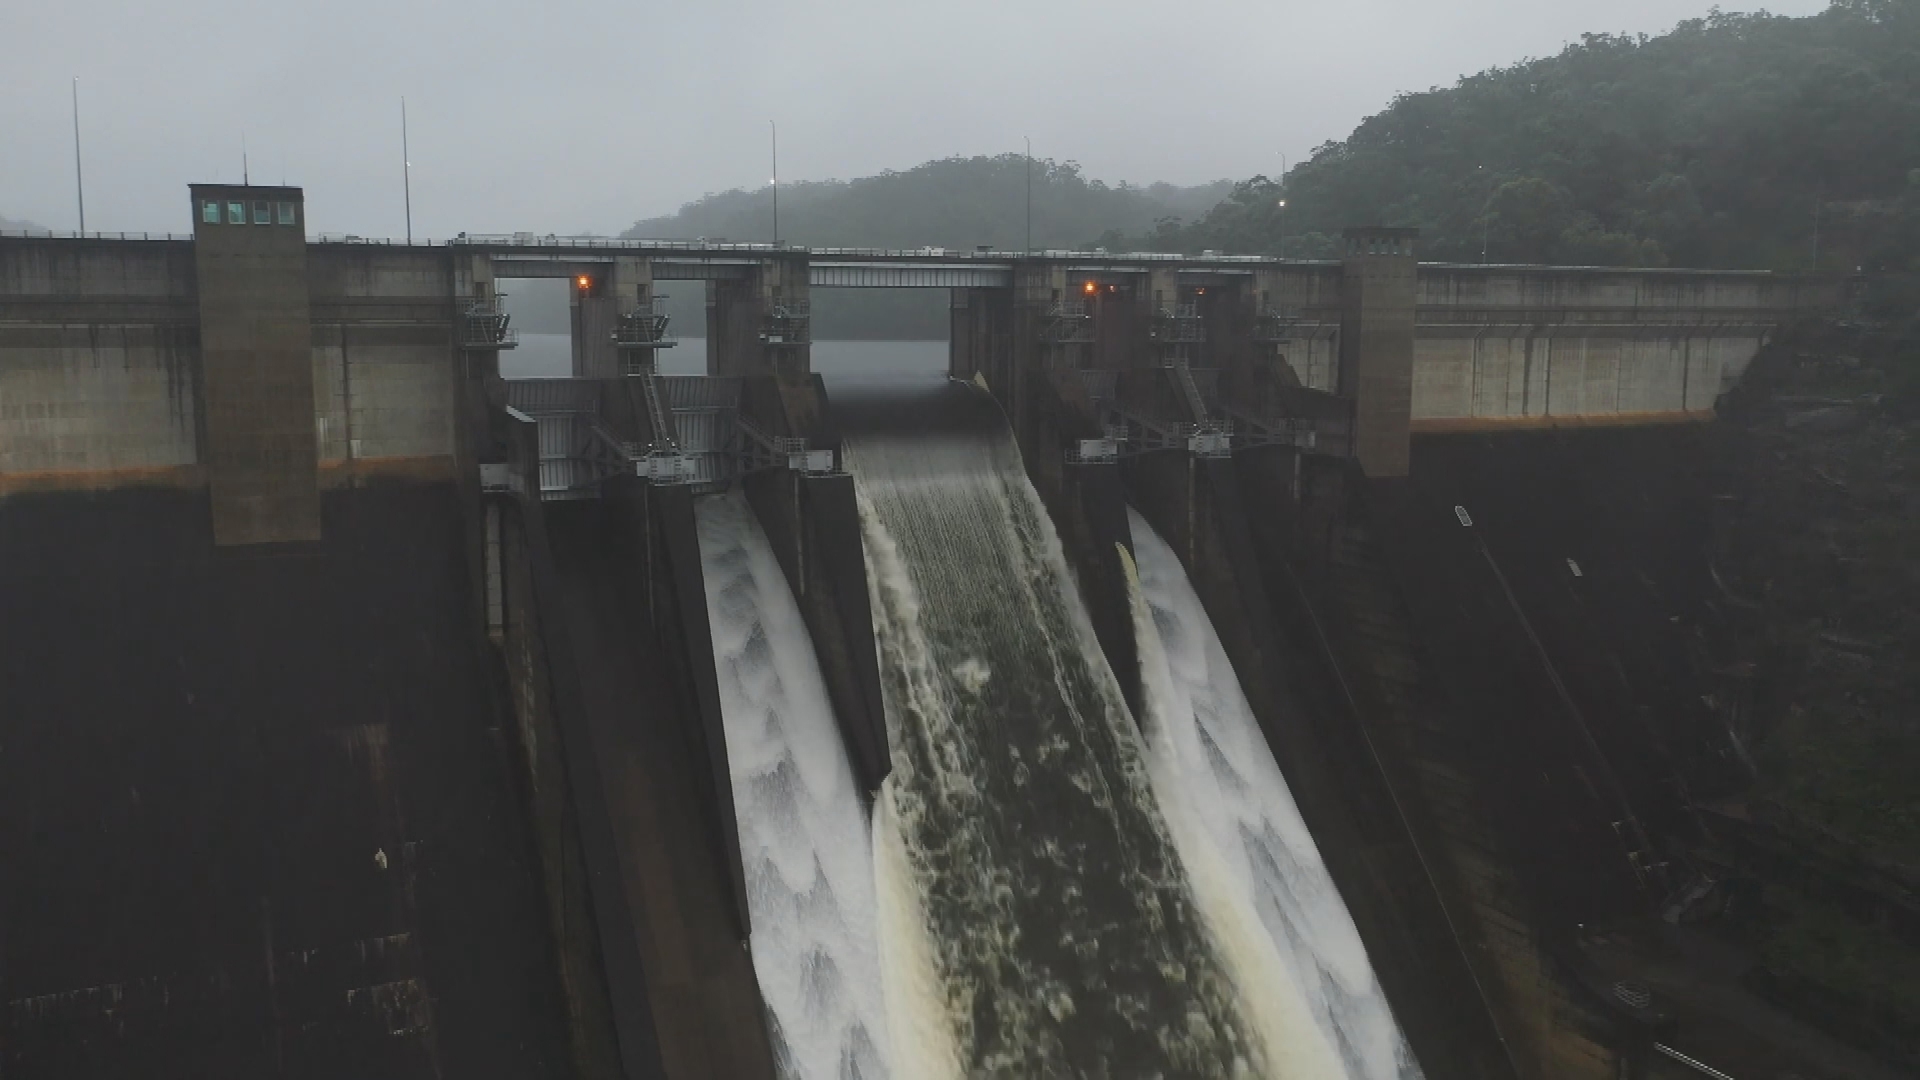 warragamba dam set to spill as flood warnings issued